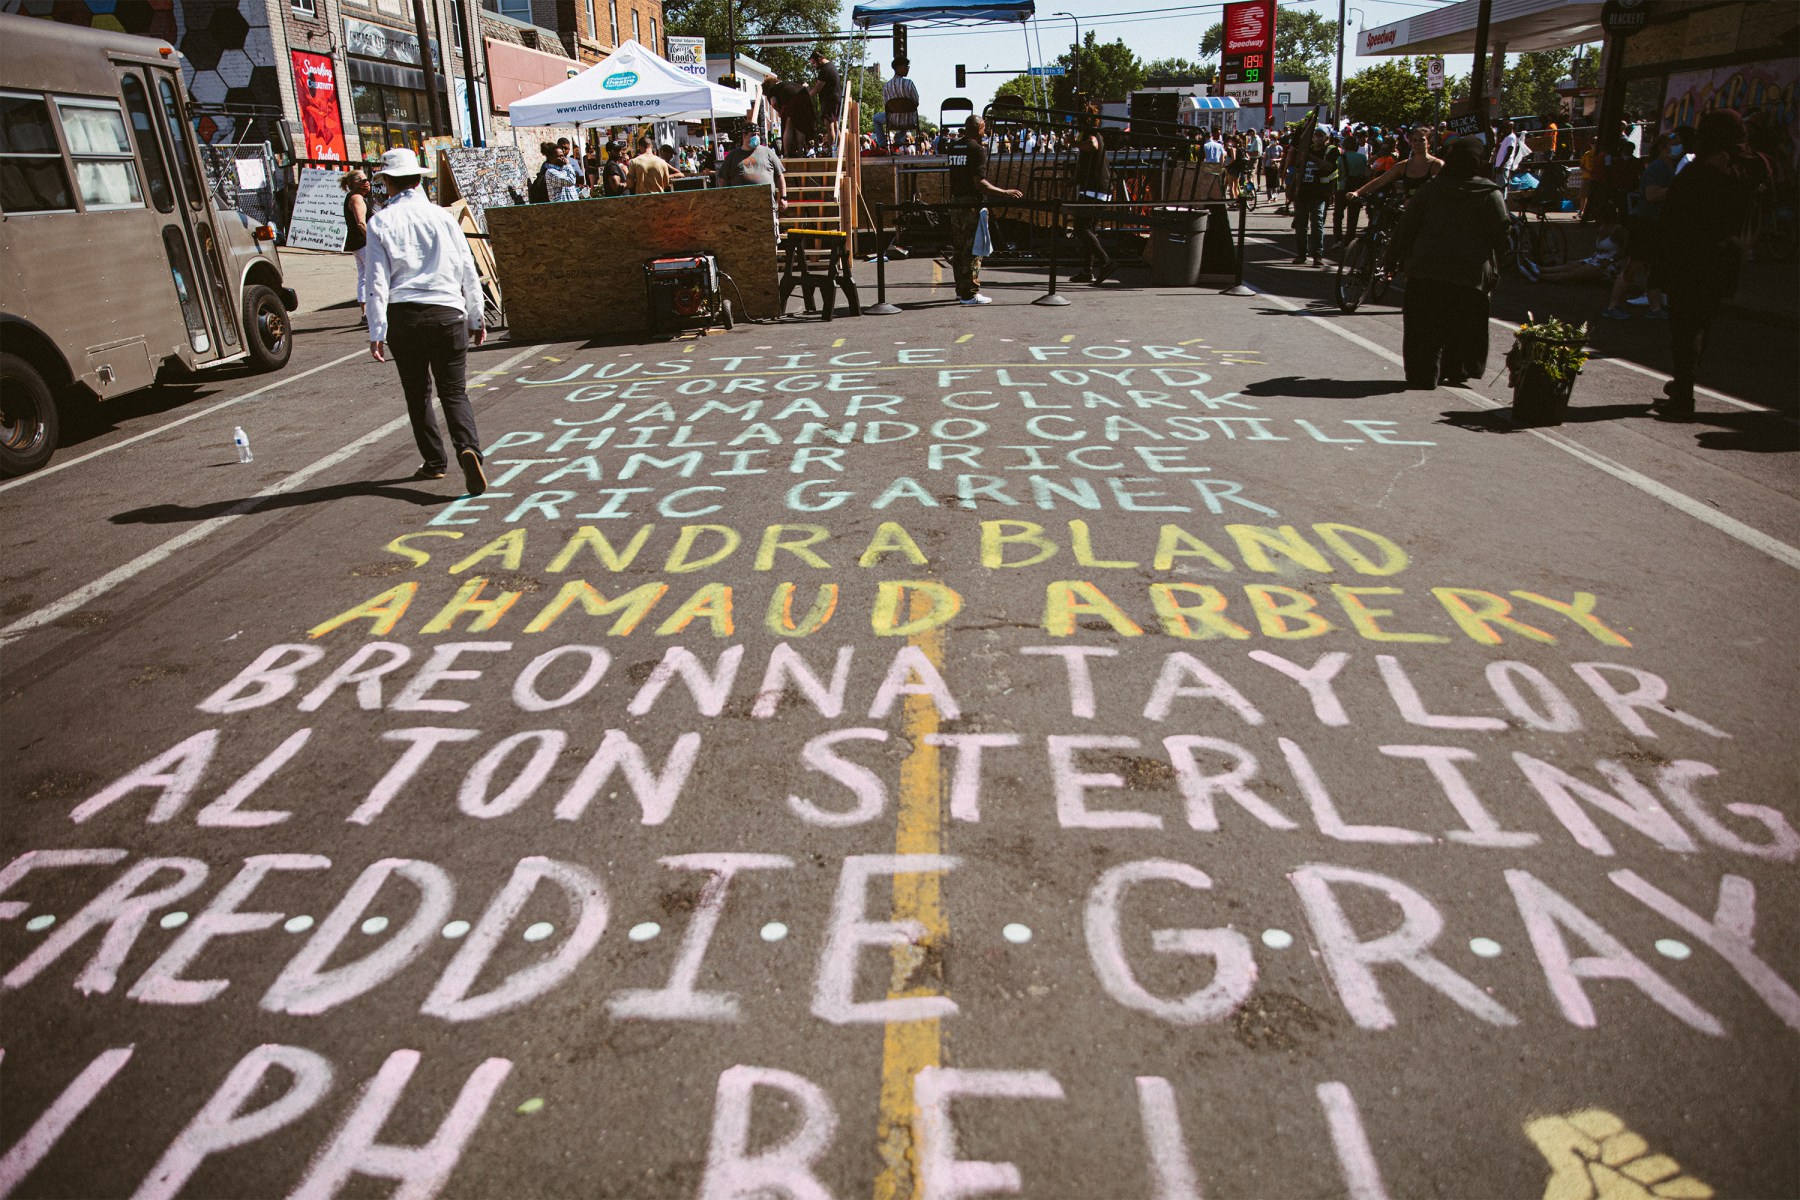 A list of Black victims of police, white supremacist and other violence painted on the street.